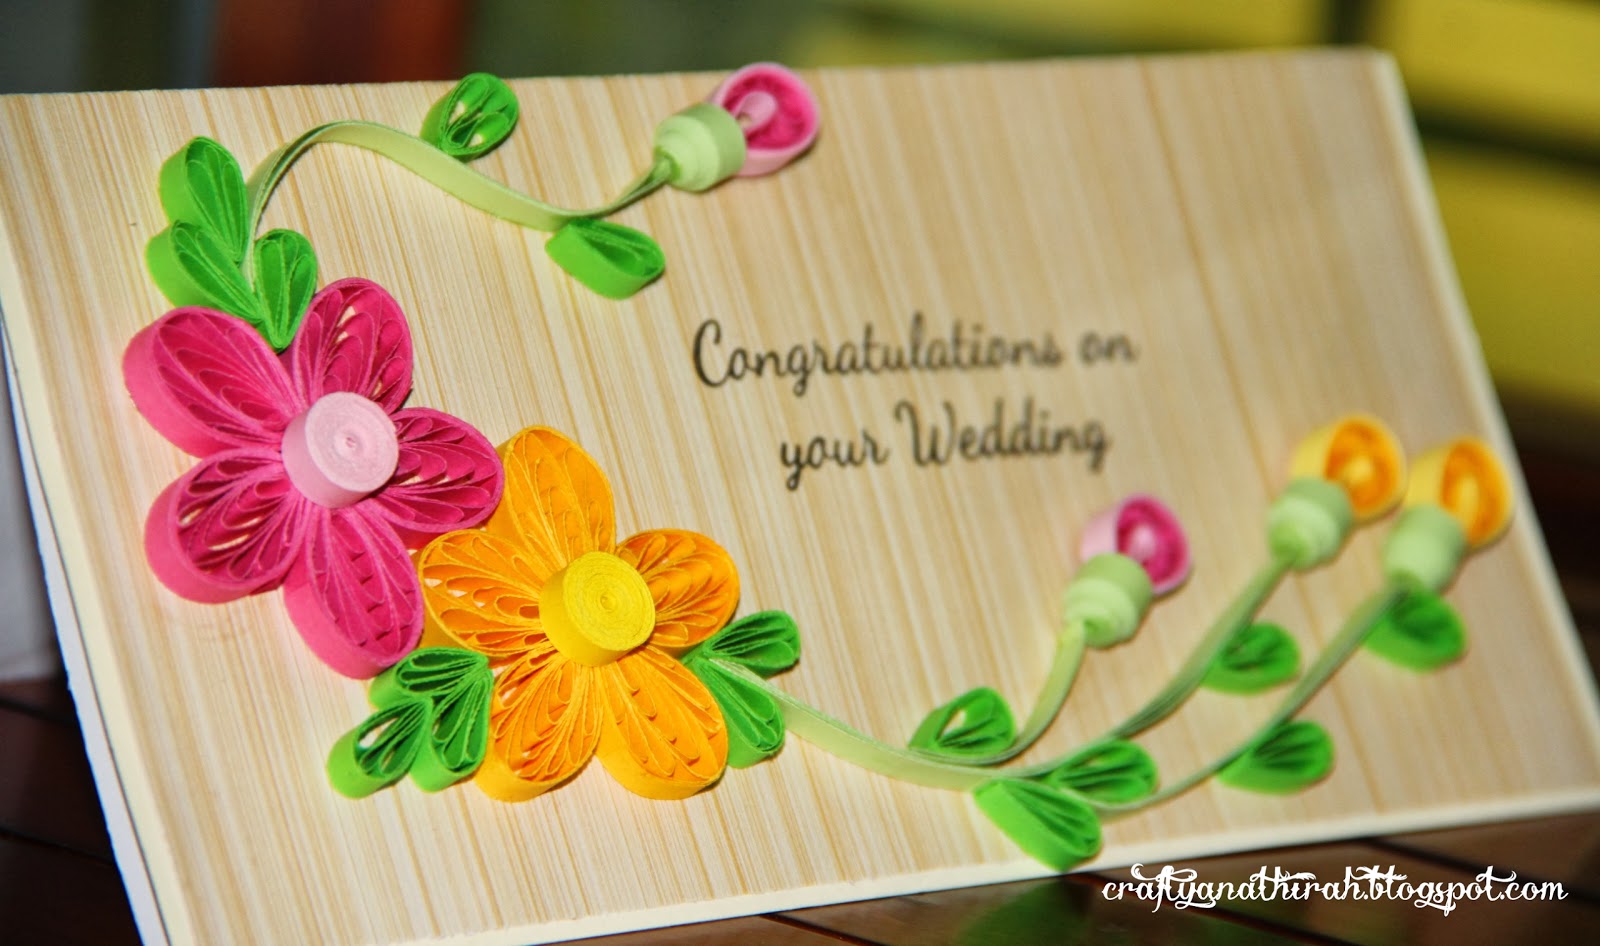 Wedding Wishes Cards For Friend Surprise her friends with